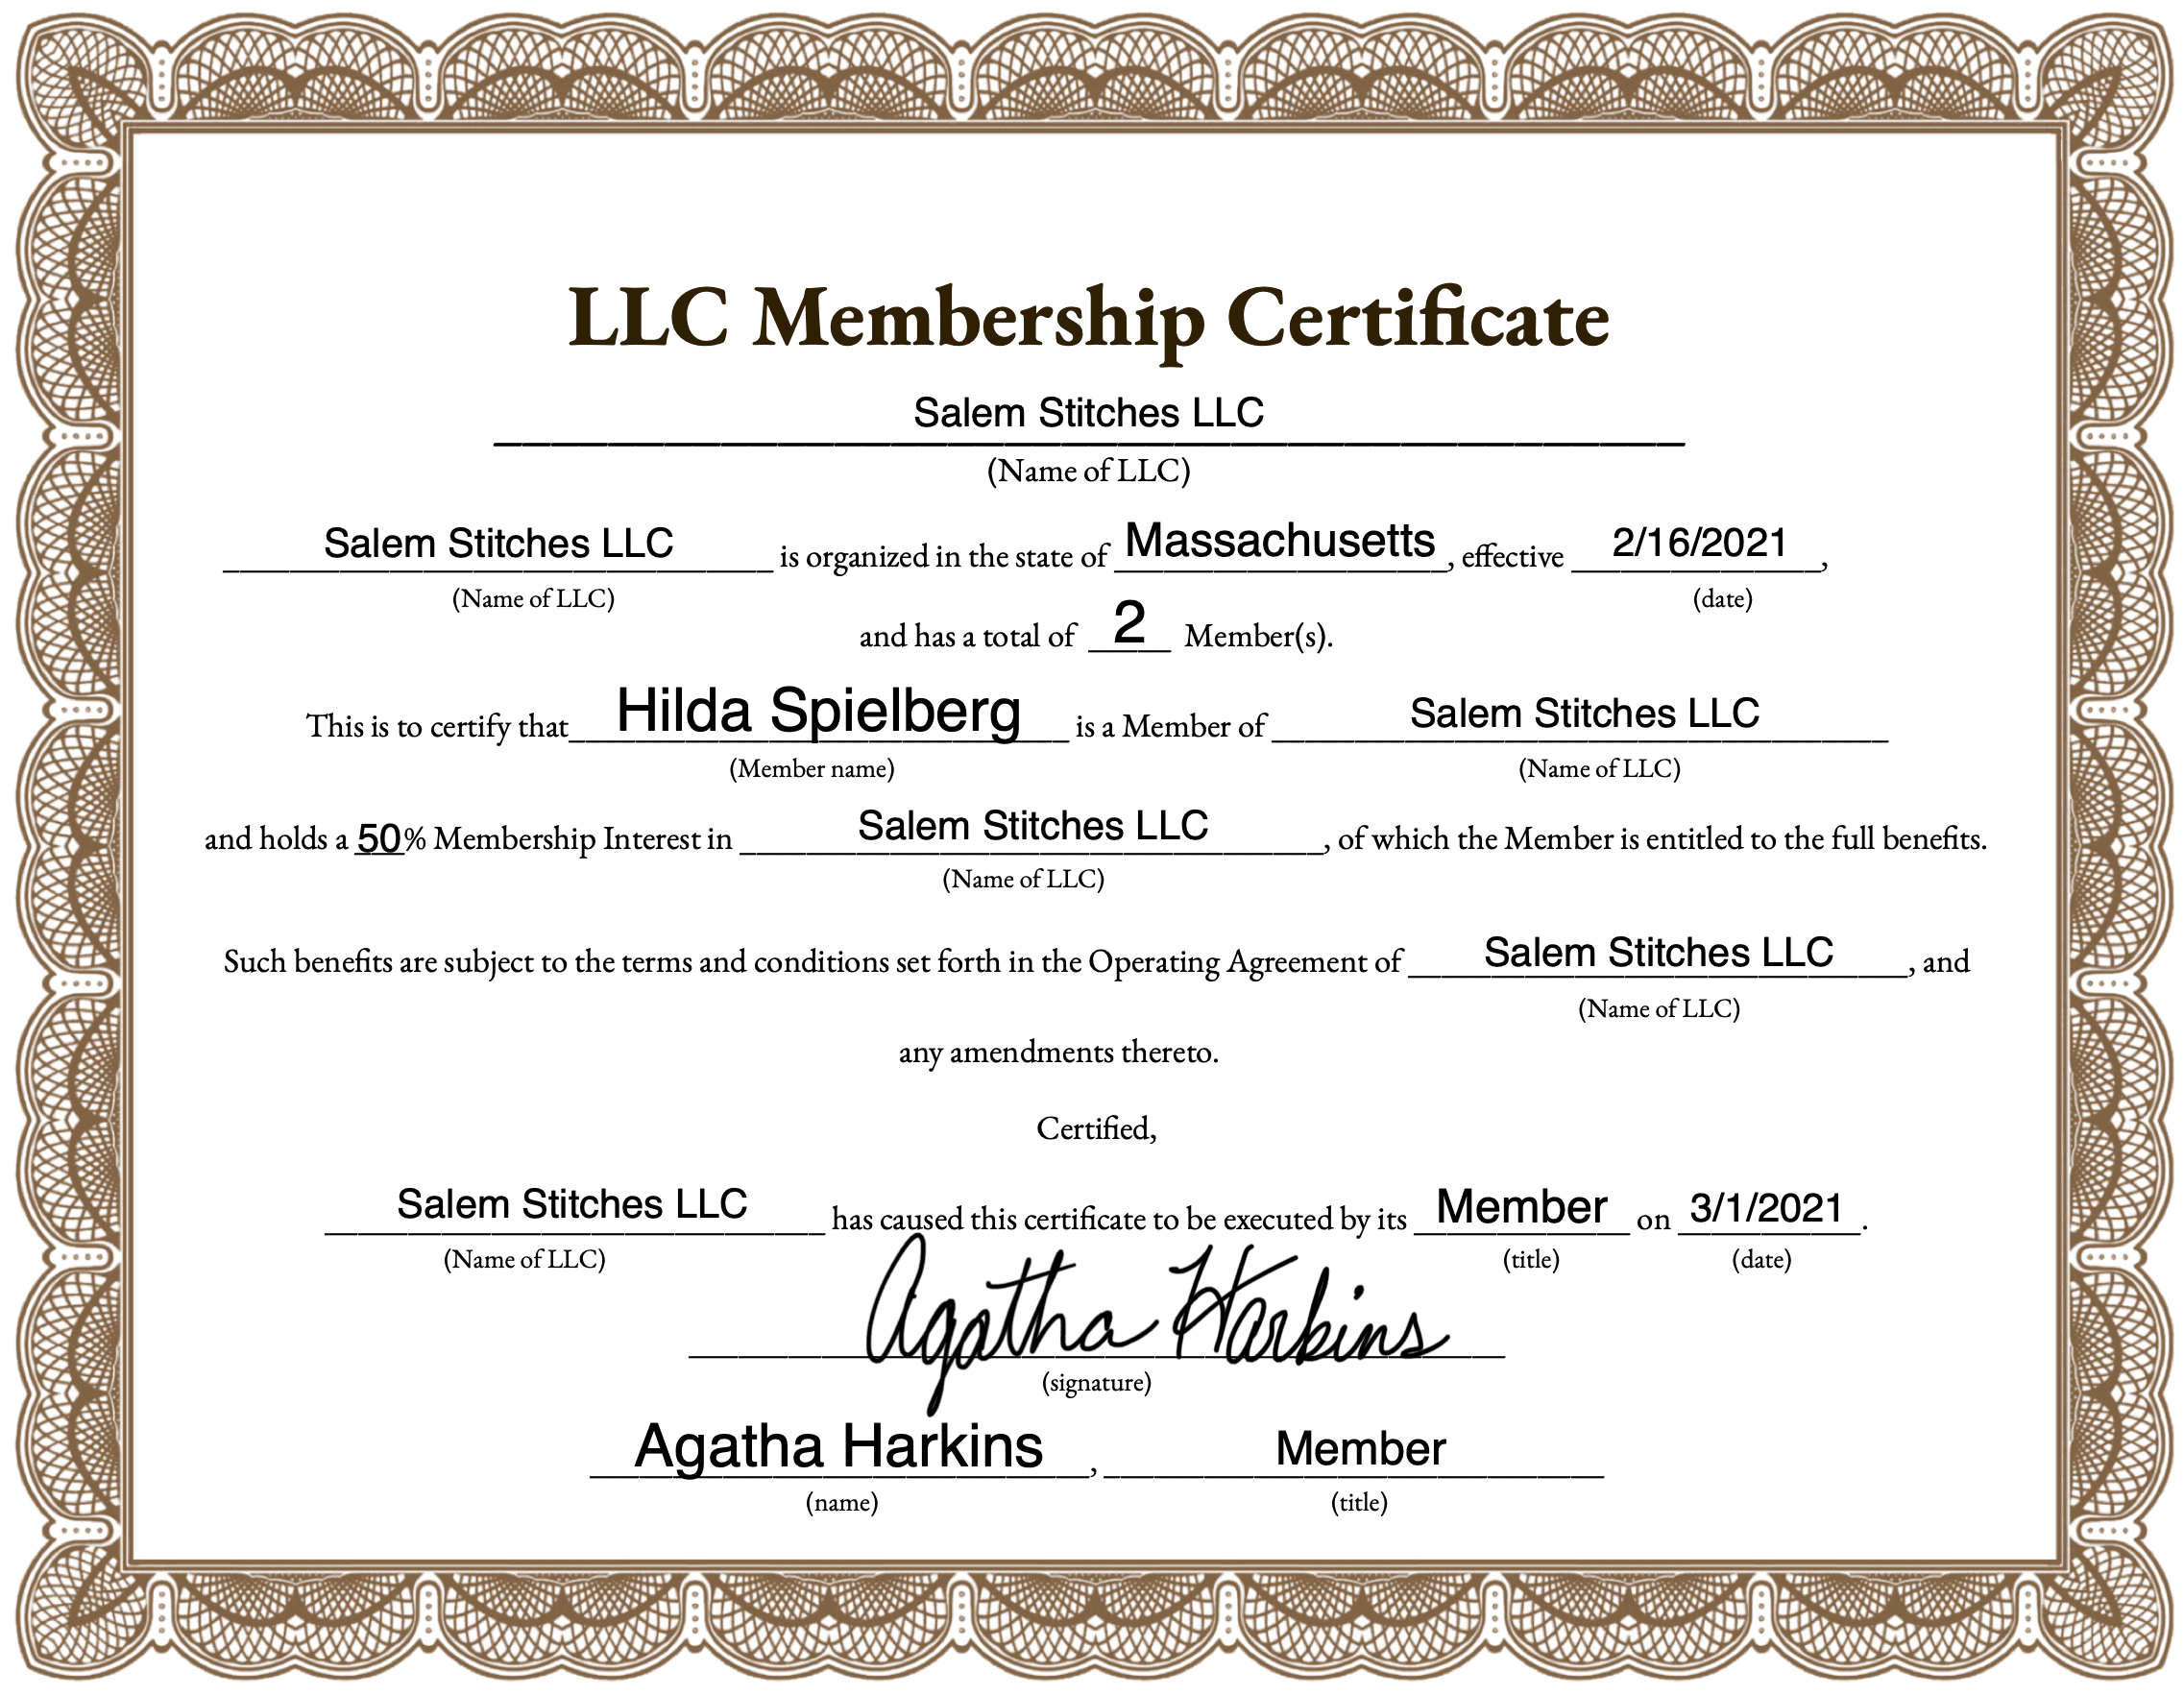 Example of a completed LLC Membership Certificate template